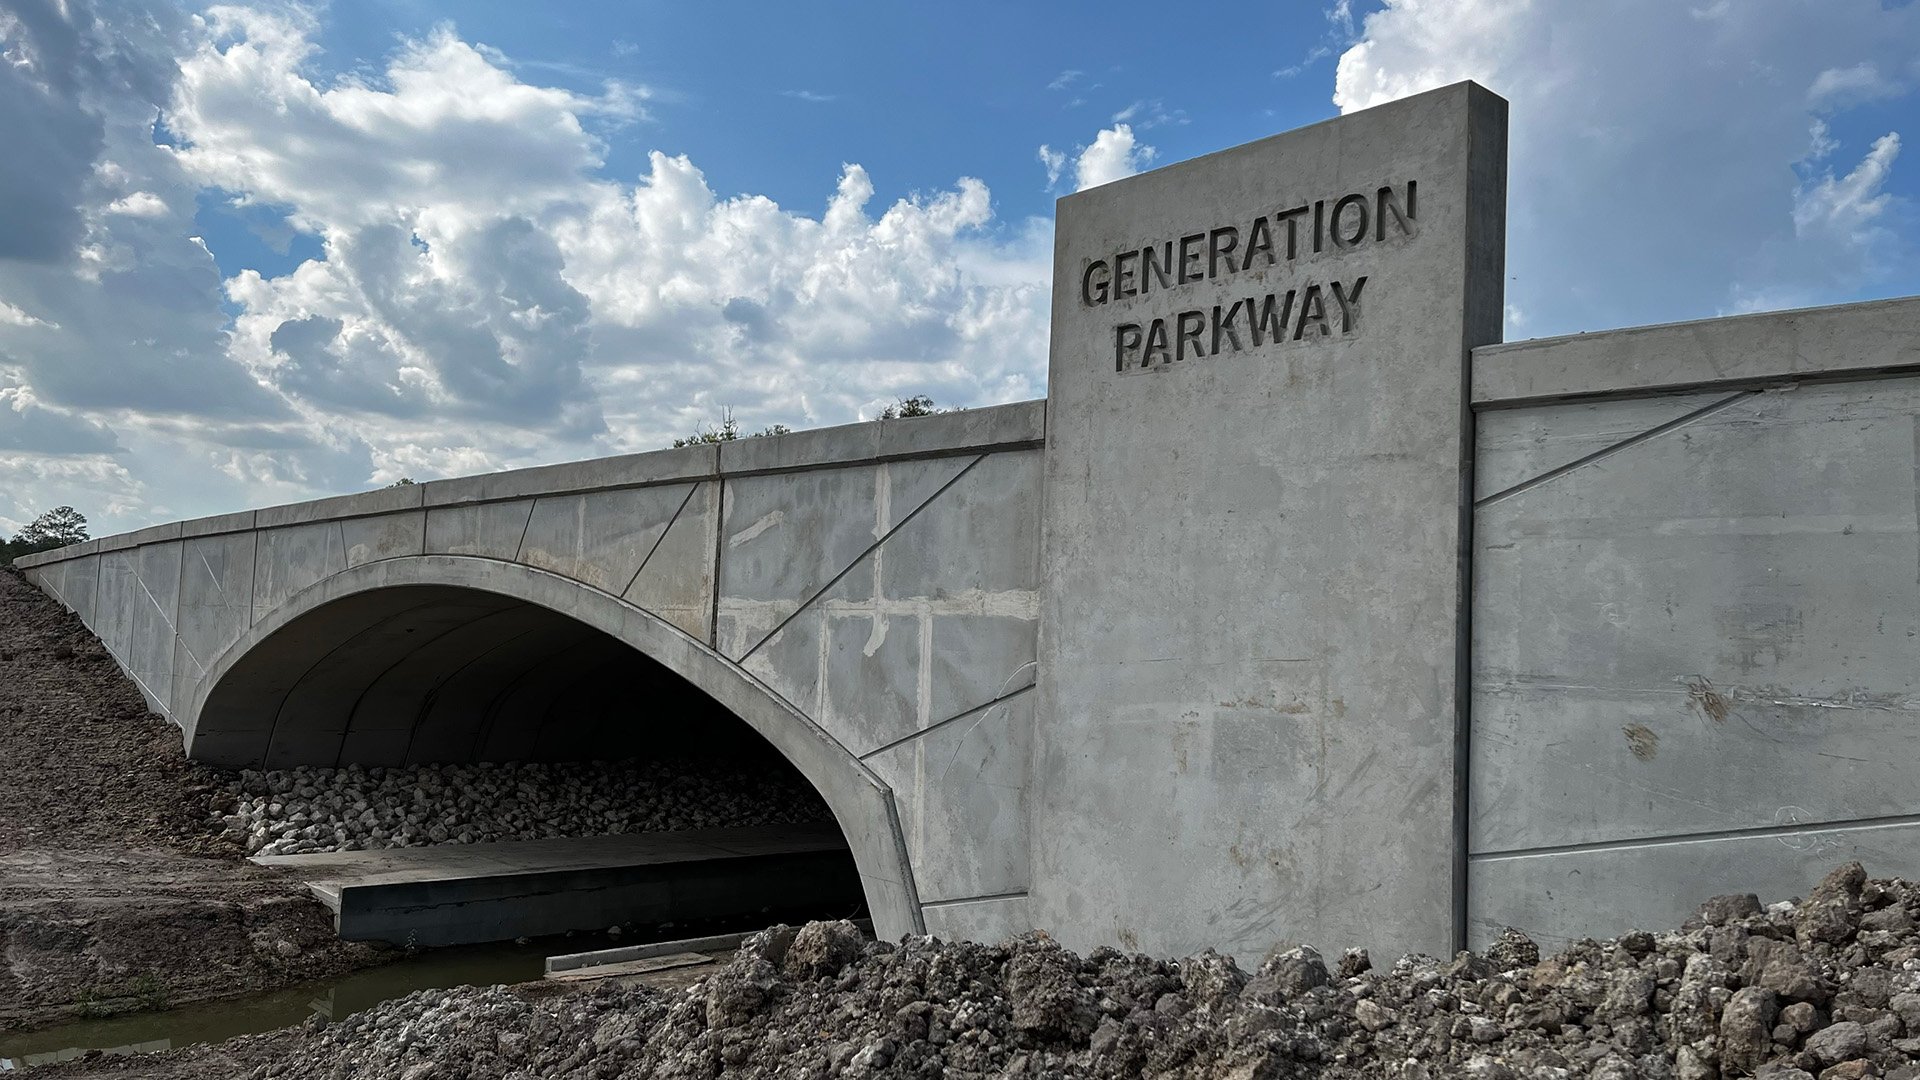 A new bridge for Generation Parkway